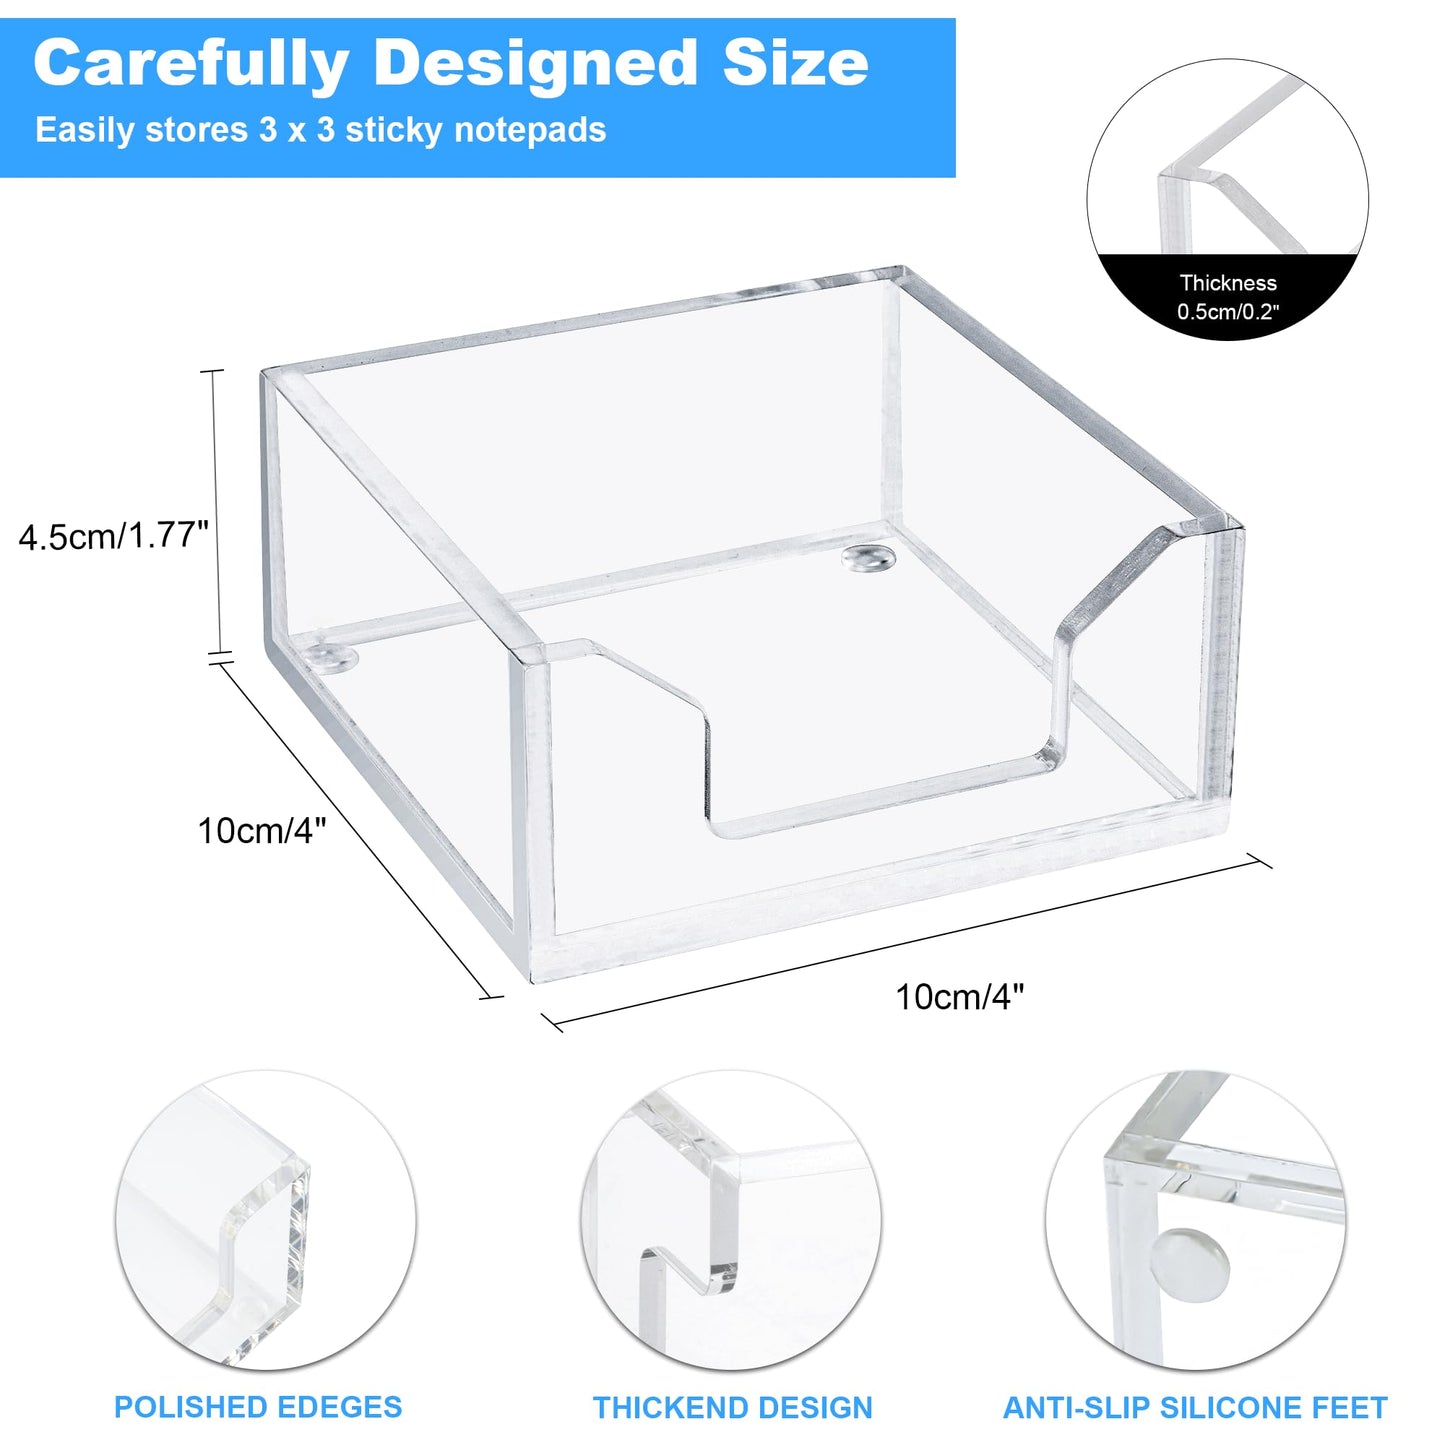 Acrylic Sticky Note Holders 2 Packs Clear Acrylic Memo Holder 3.94 x 3.94 x 1.77 inch for Desk Organization Office Home, Post Pop Note Dispenser for Office Accessories (BQ201)